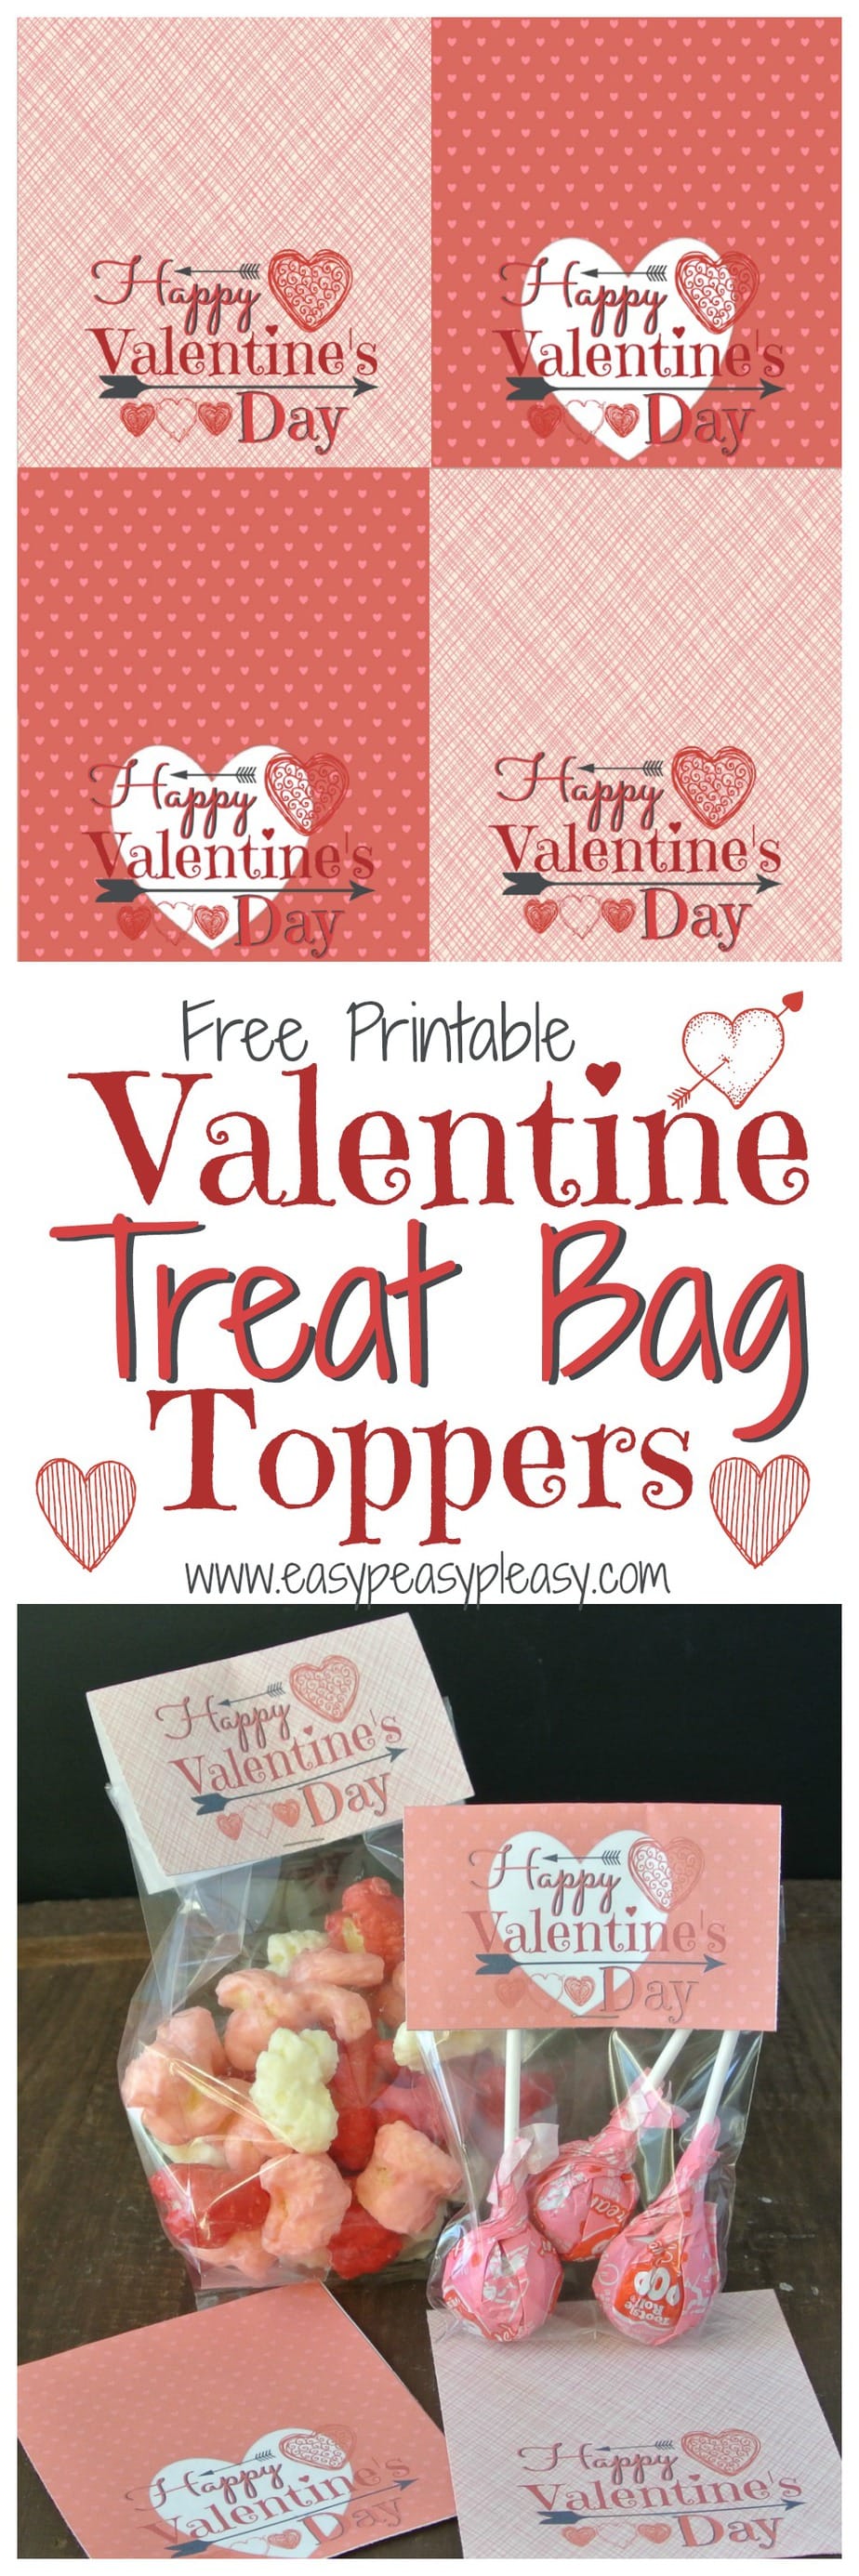 Free Printable Valentine Treat Bag Toppers! Perfect for classrooms parties!